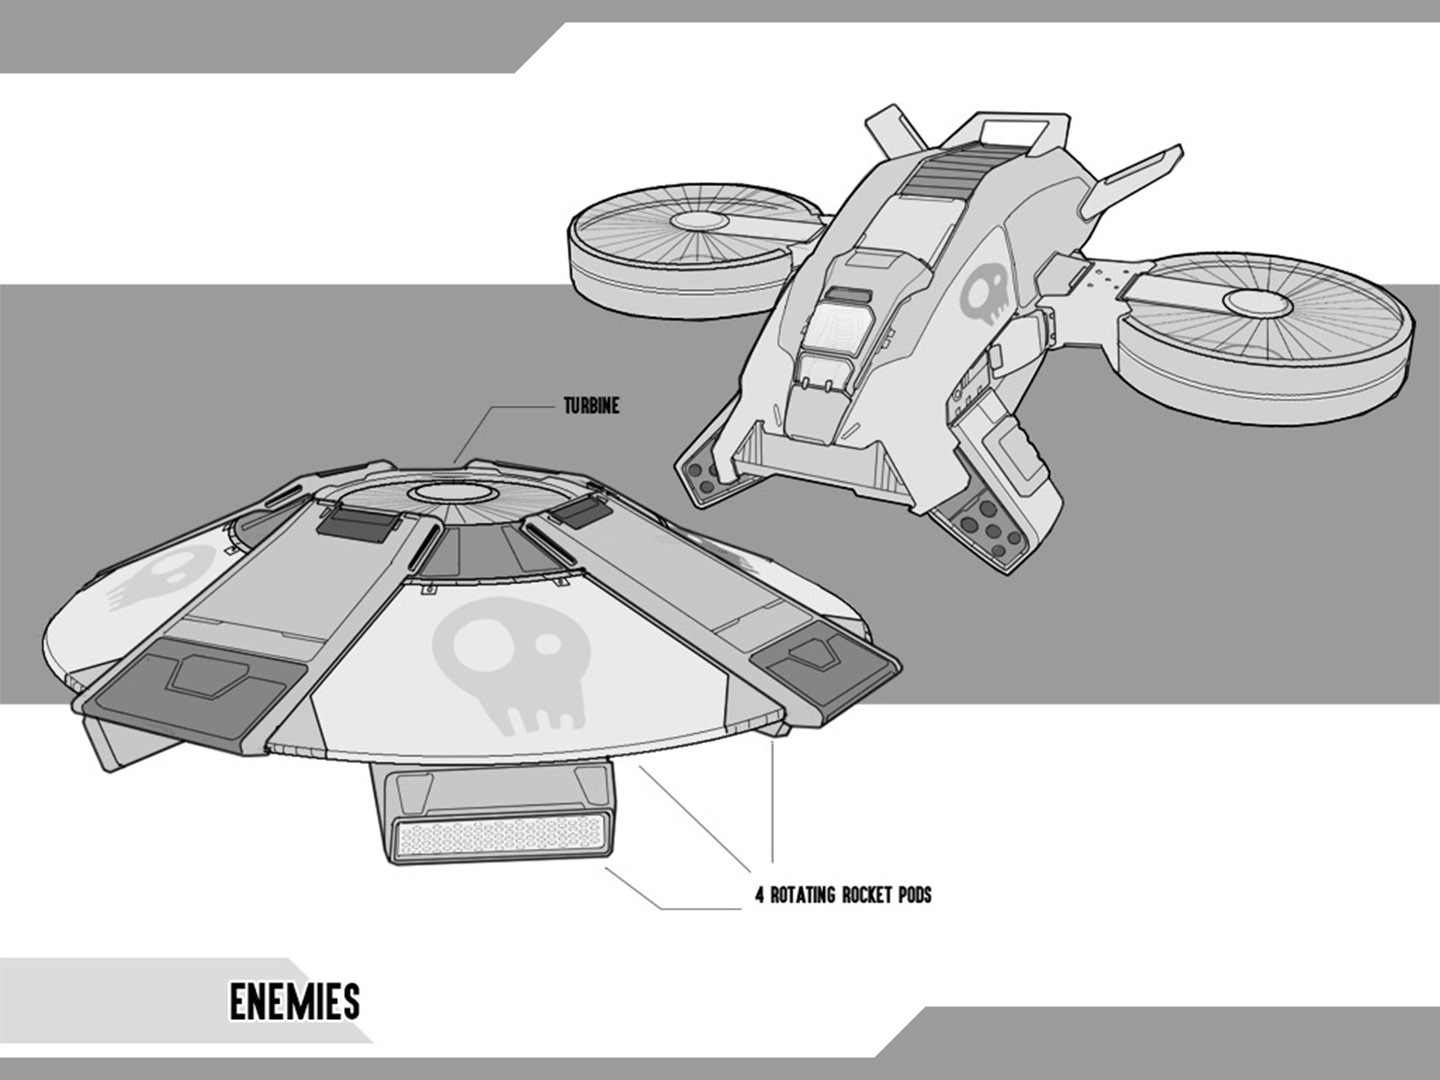 The initial concepts were between a UFO inspired alien ship and a type of military drone vehicle. I decided to go with a little bit in between.